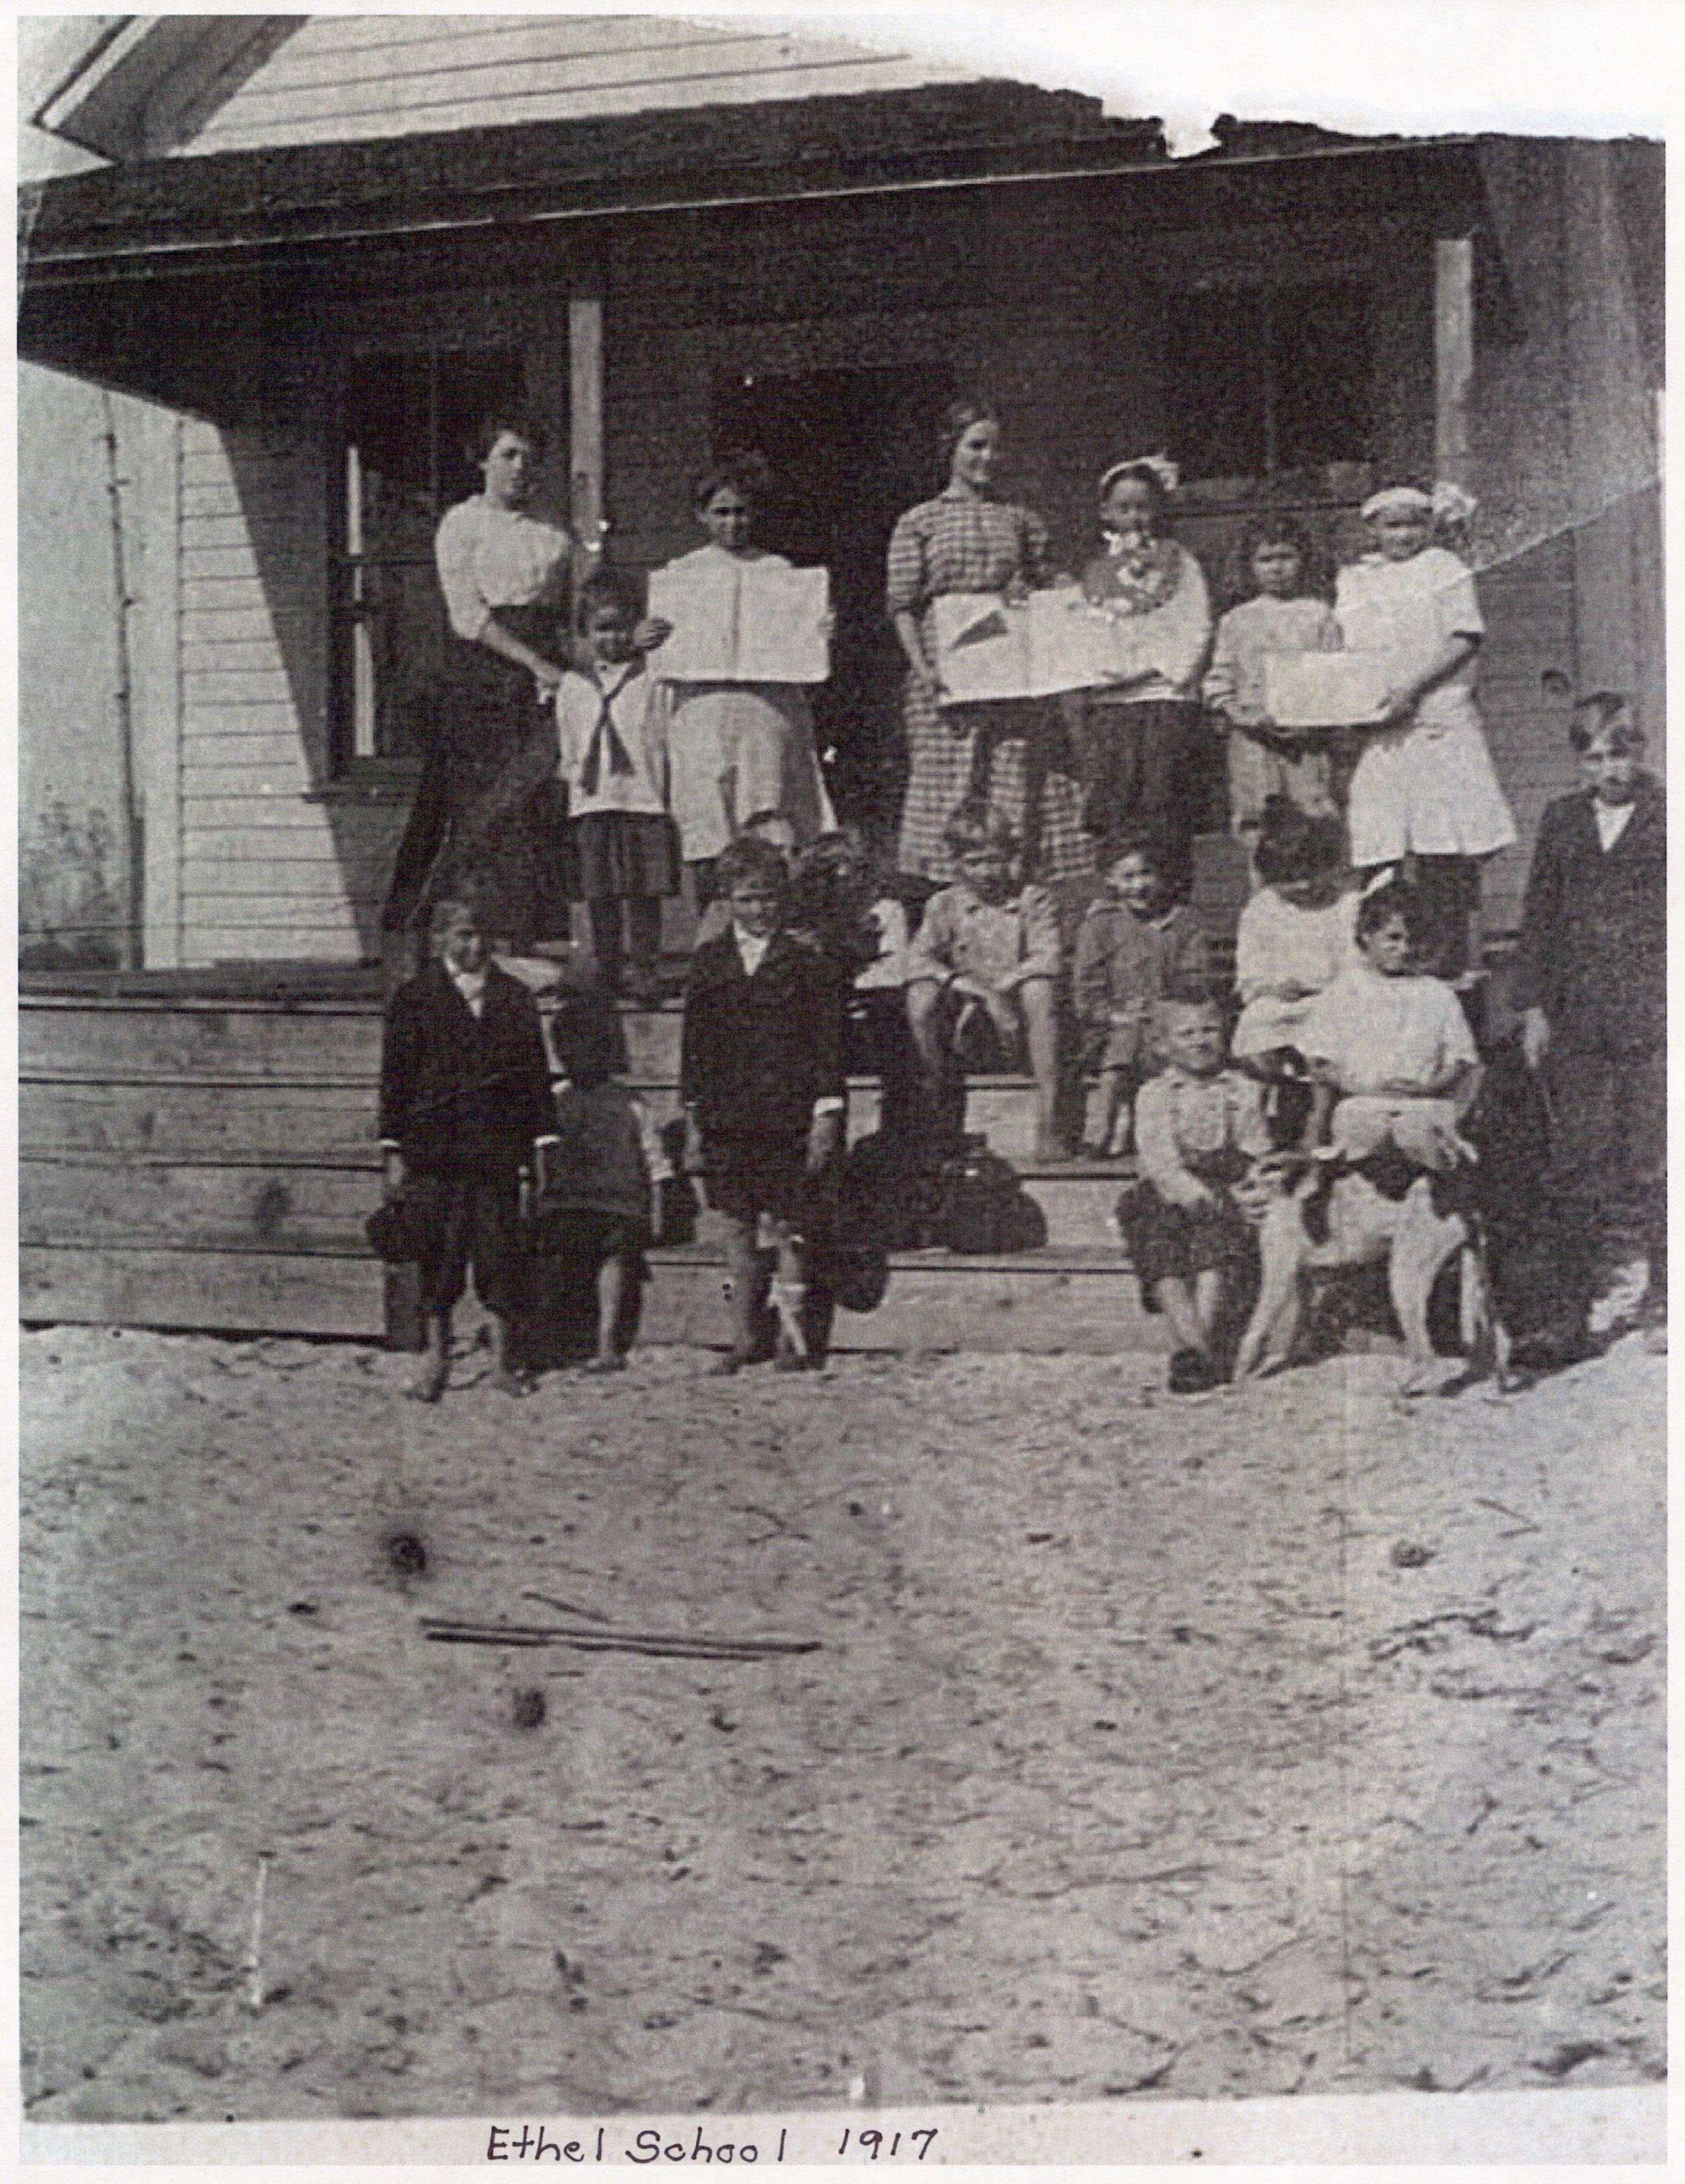 Photo of Ethel school house 1917 with students and teachers